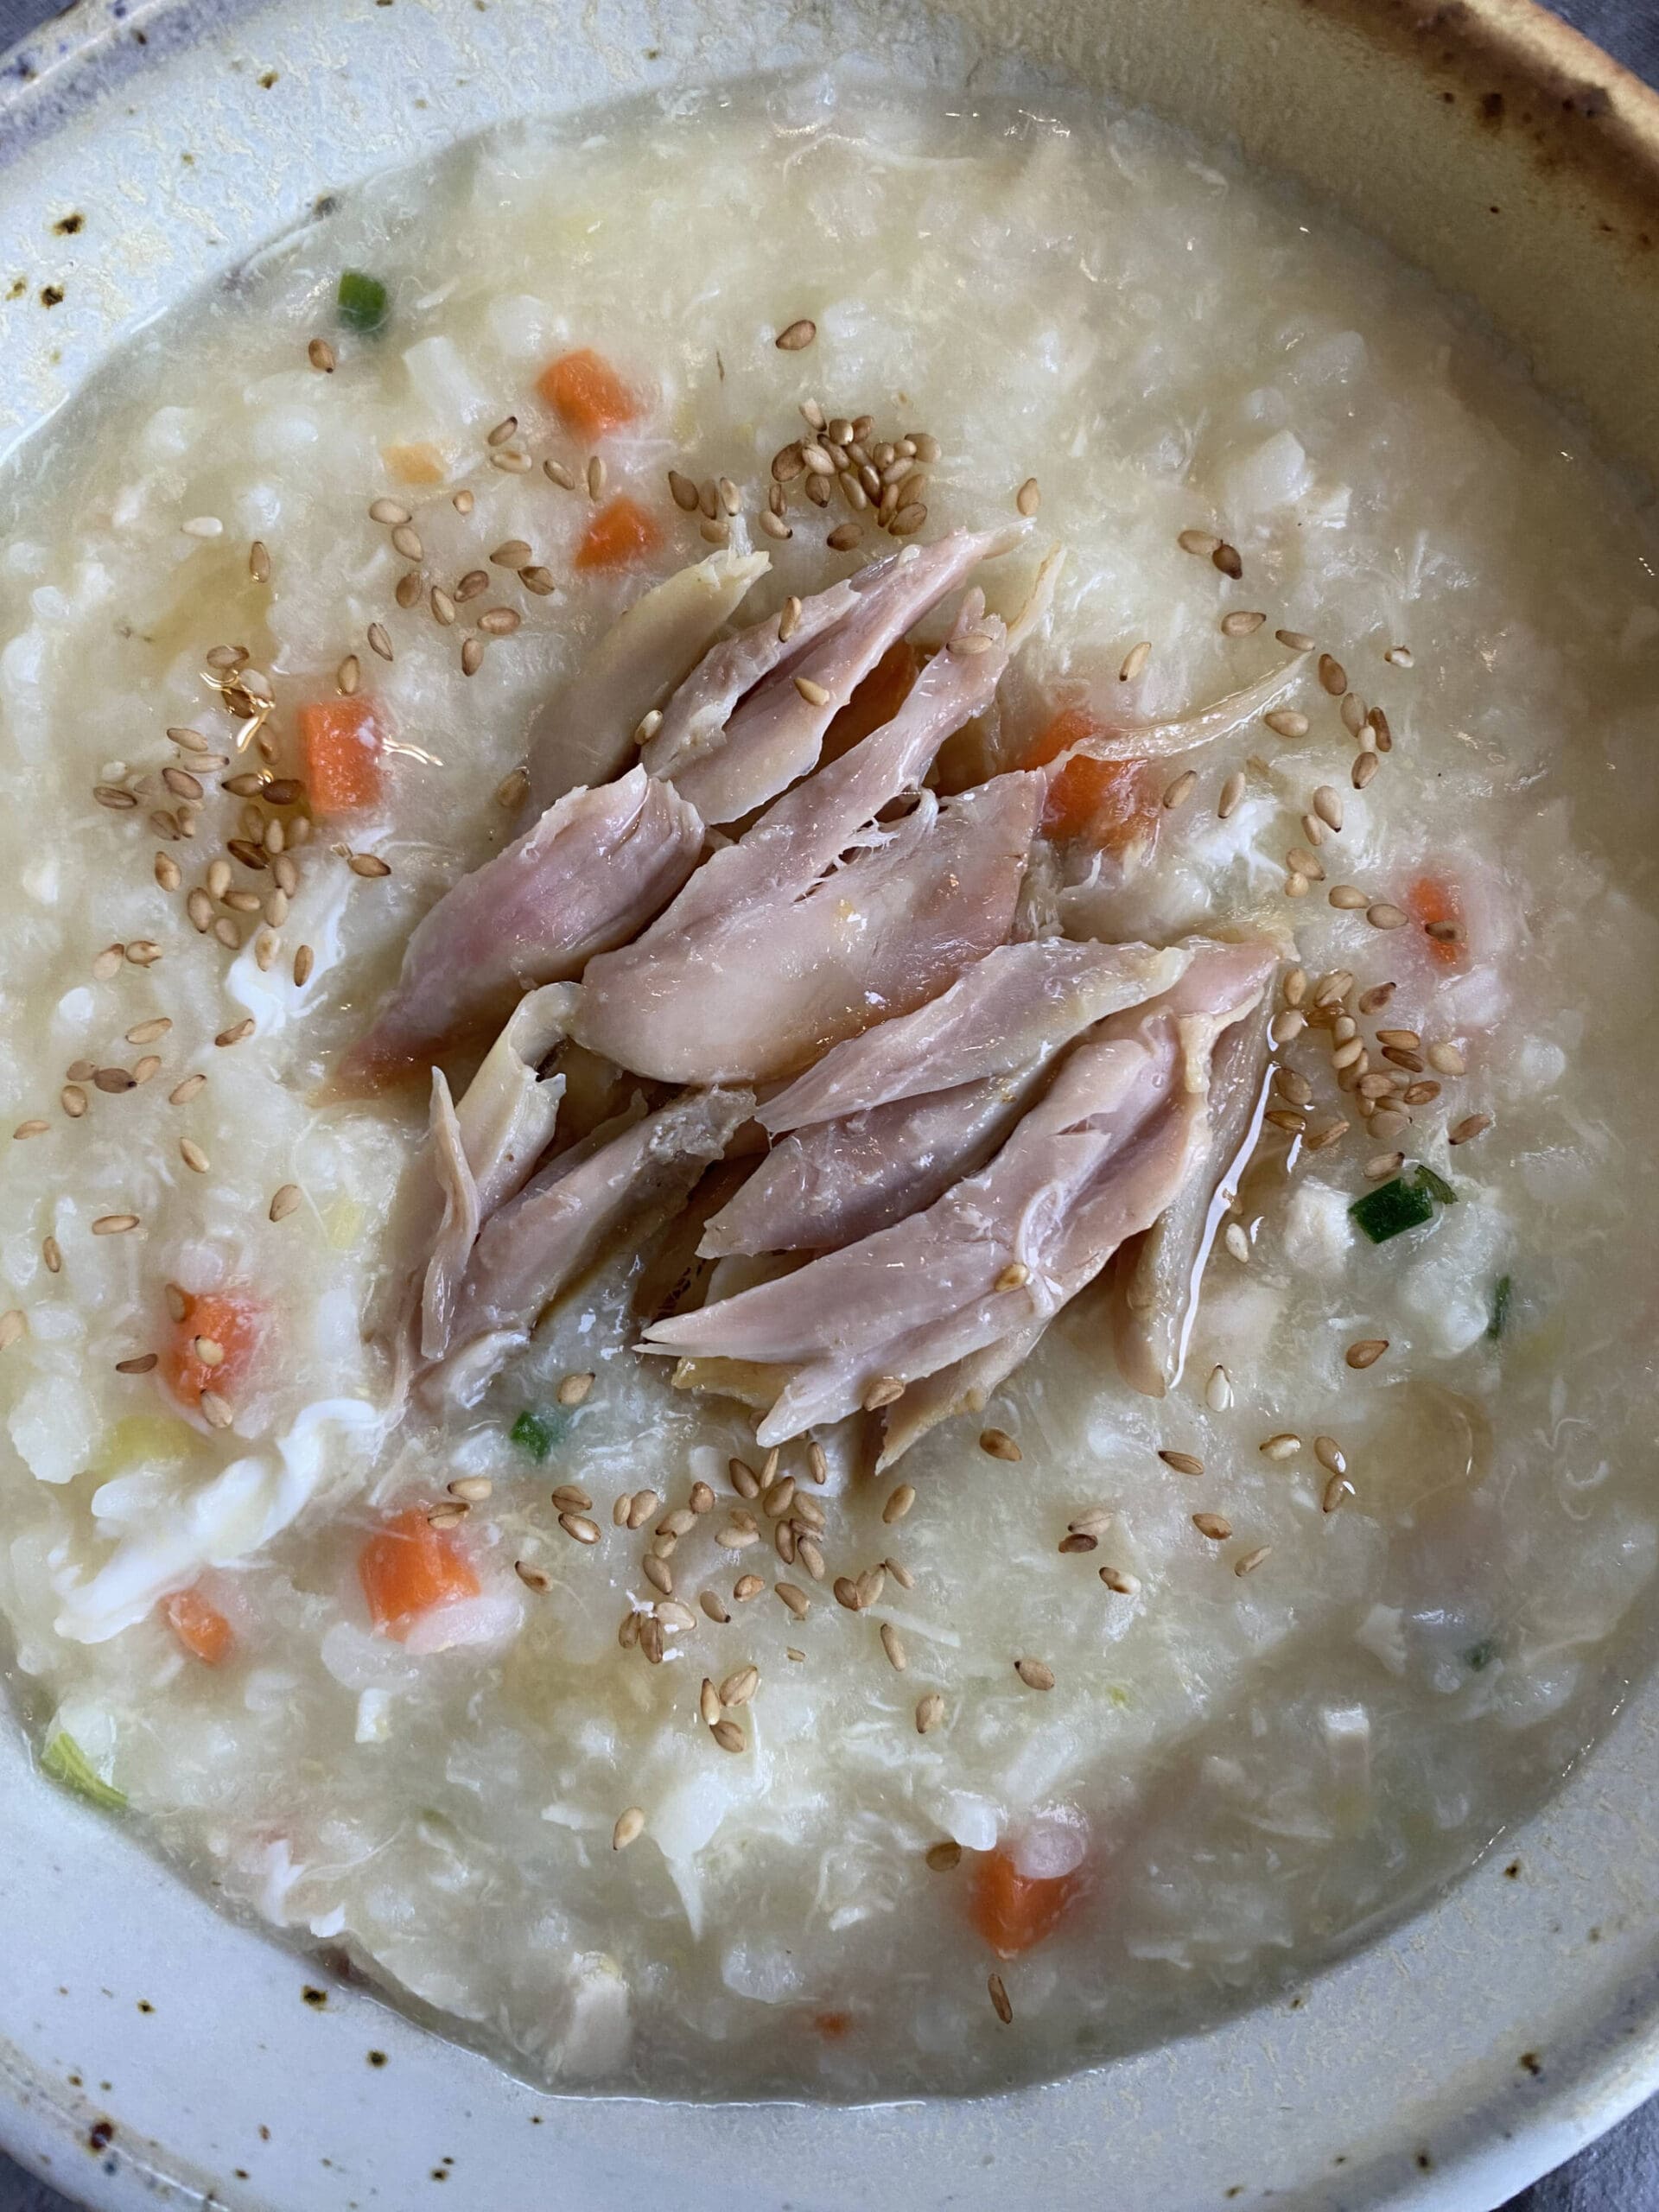 This Korean rice porridge, called dak juk, is easy to digest but hearty and nutritious, perfect for when you’re learning how to eat. (Photo by Tressa Dale/Peninsula Clarion)